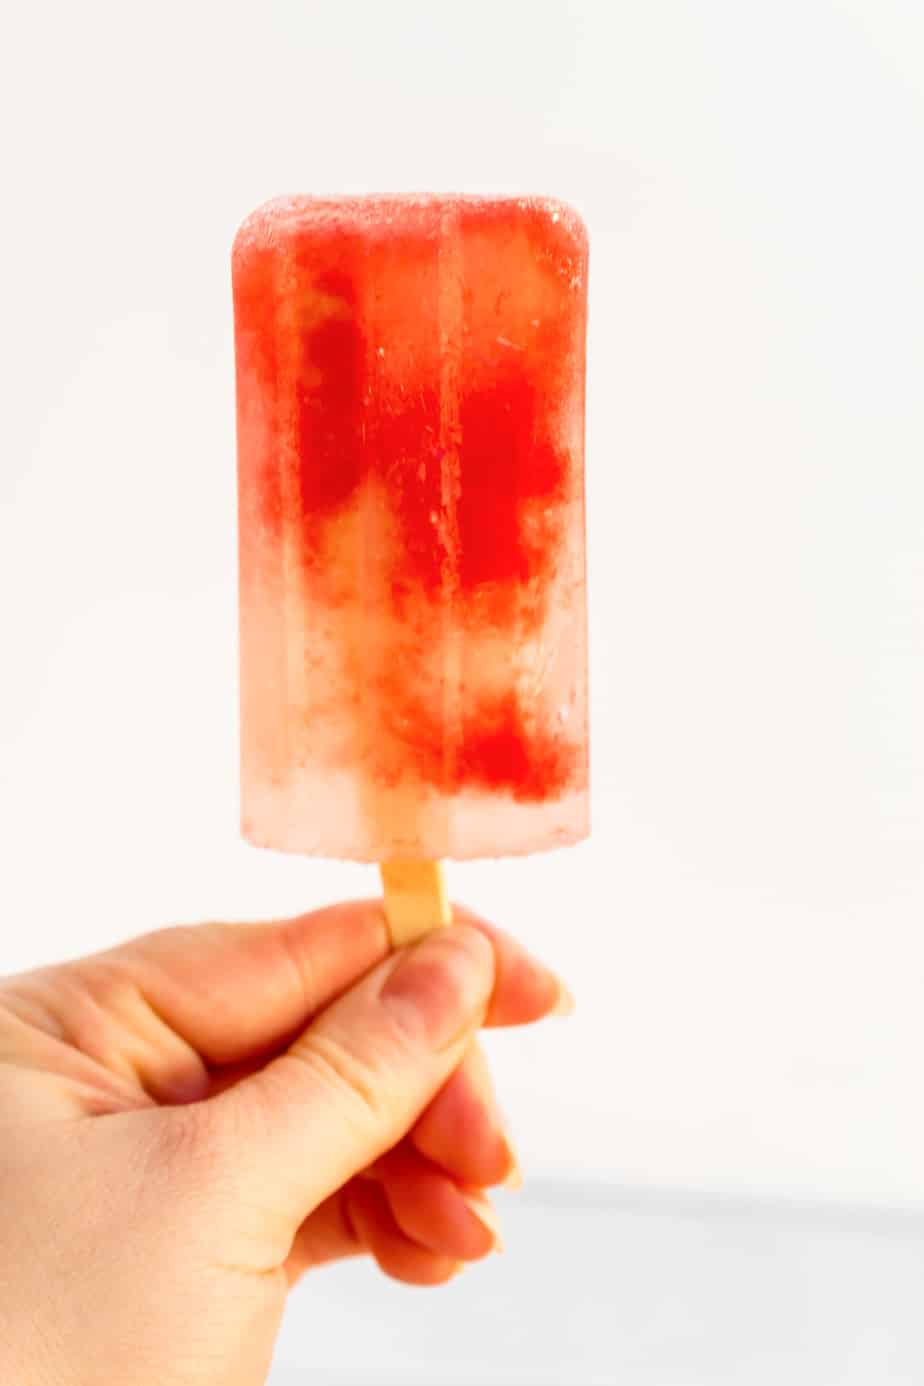 A watermelon popsicle being held by a hand from the side against a white background.